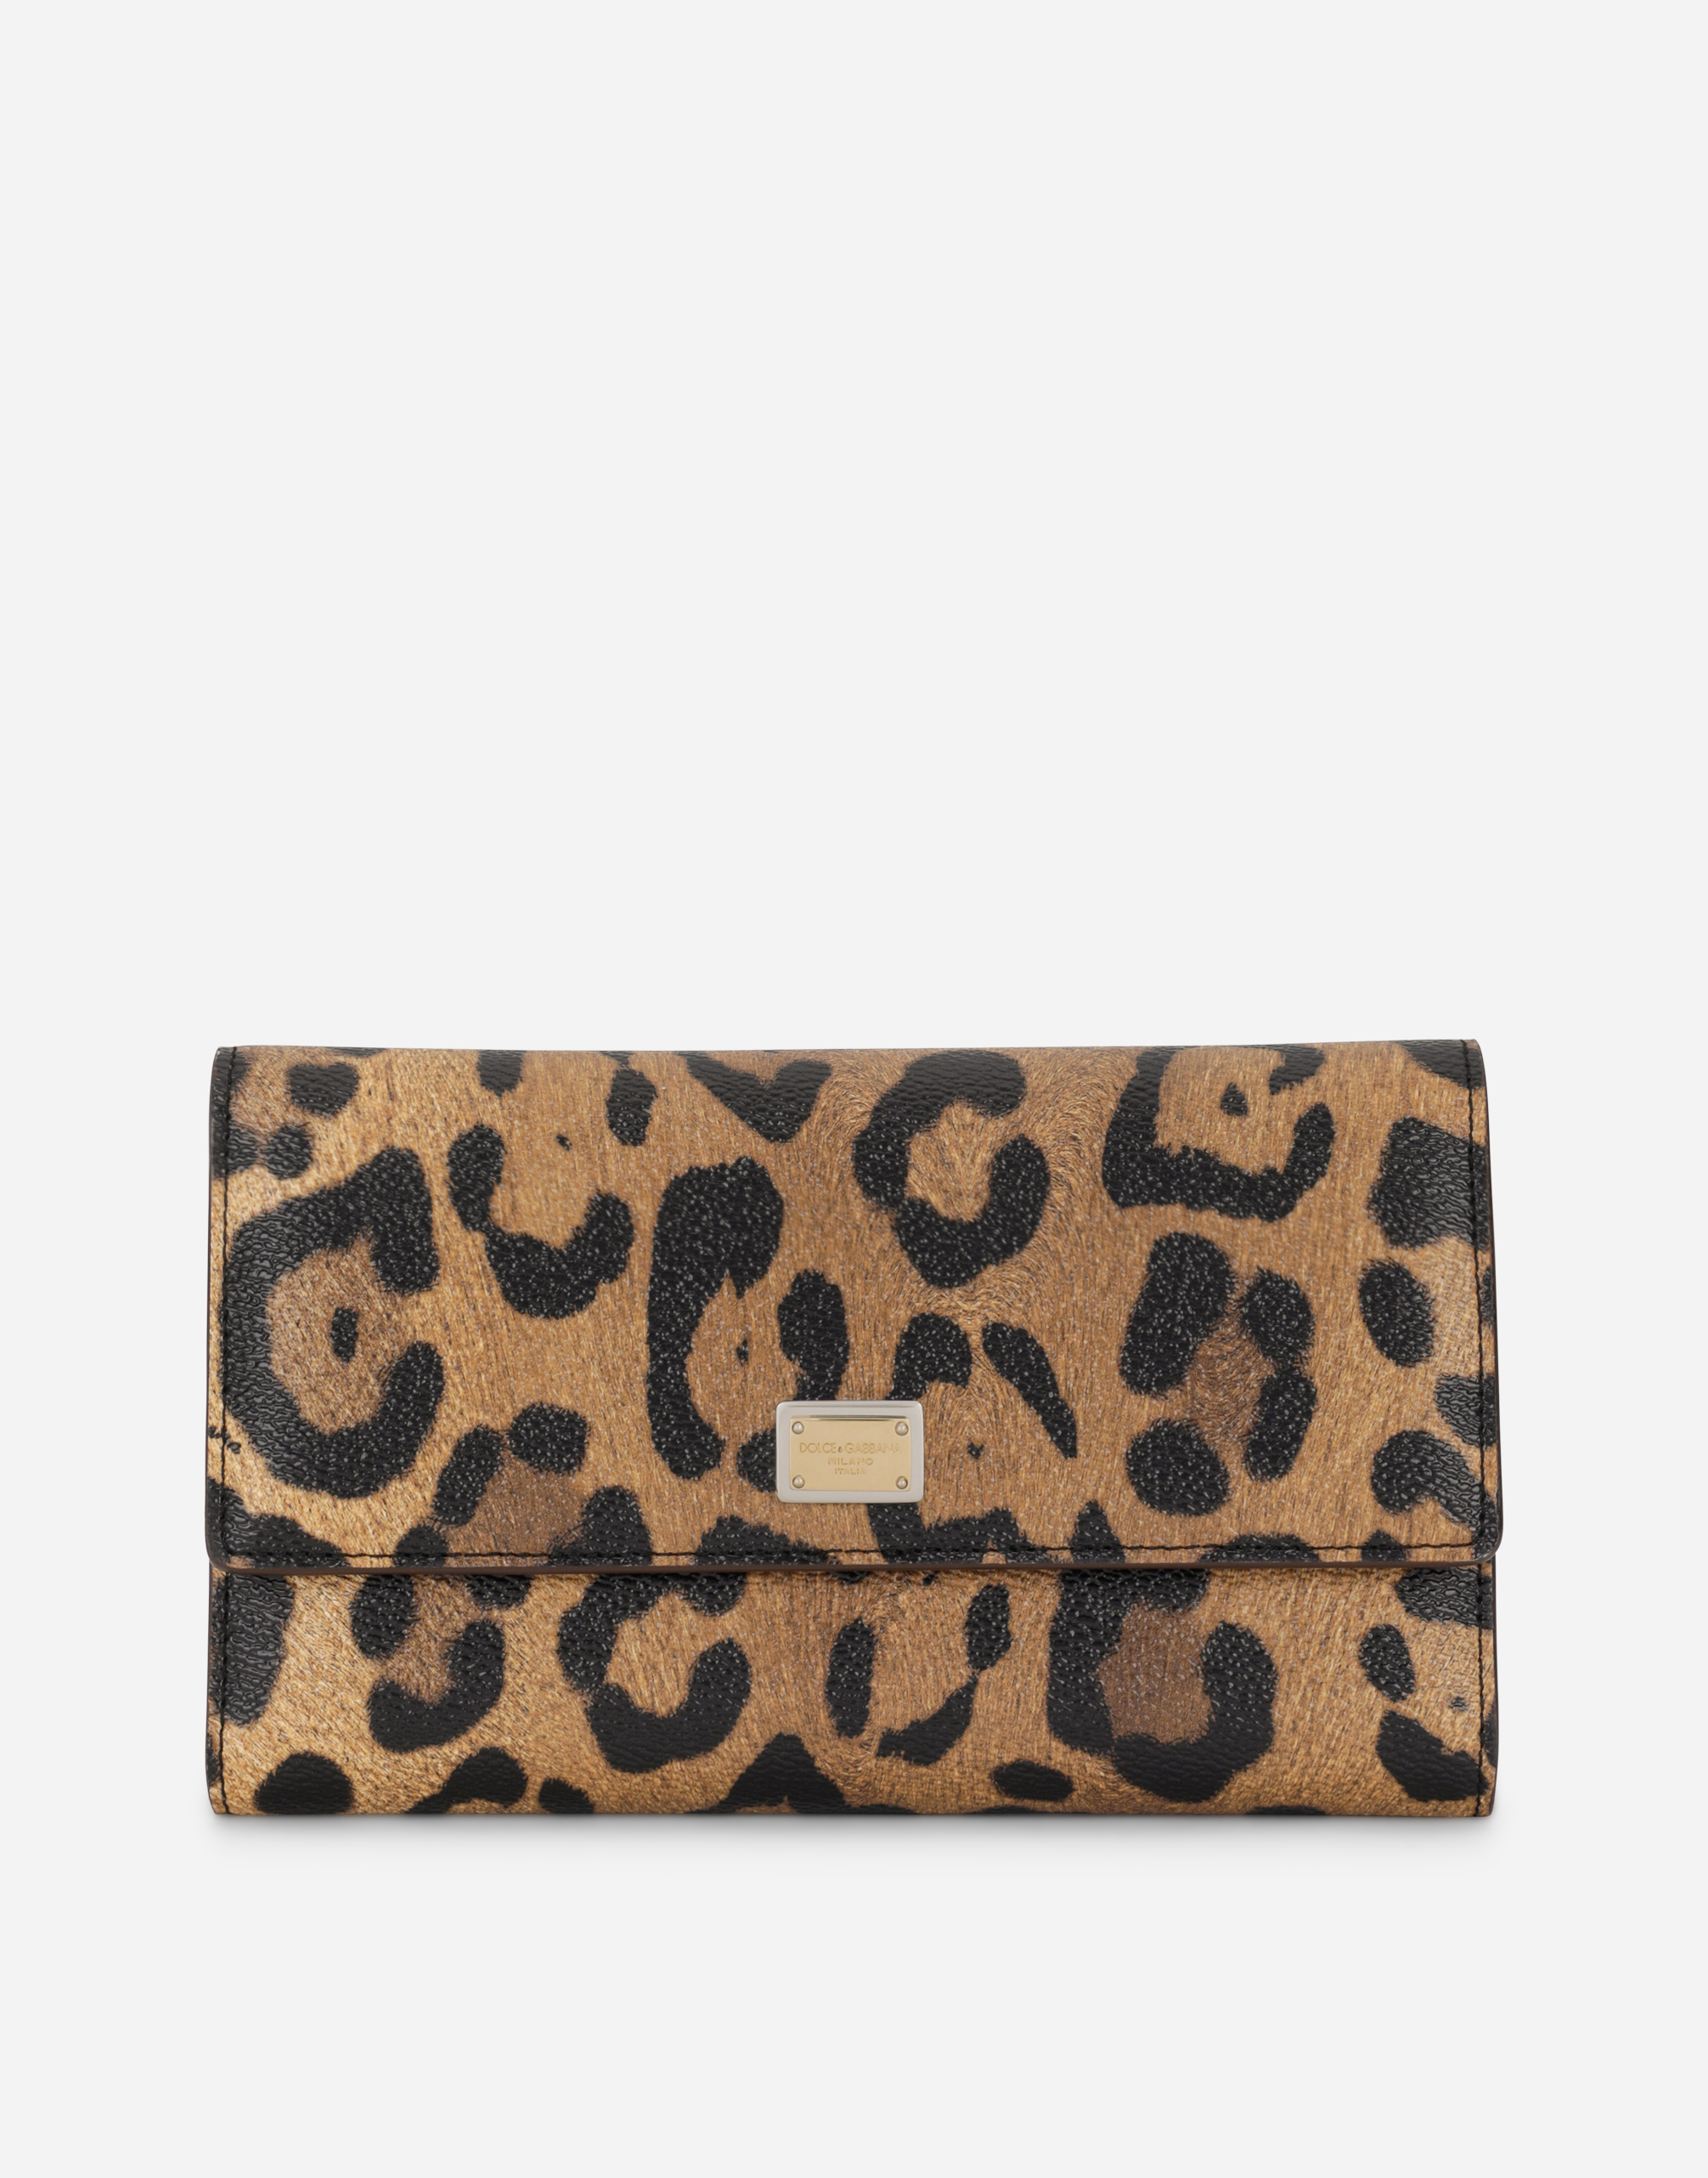 Leopard-print Crespo document holder with branded plate in Multicolor